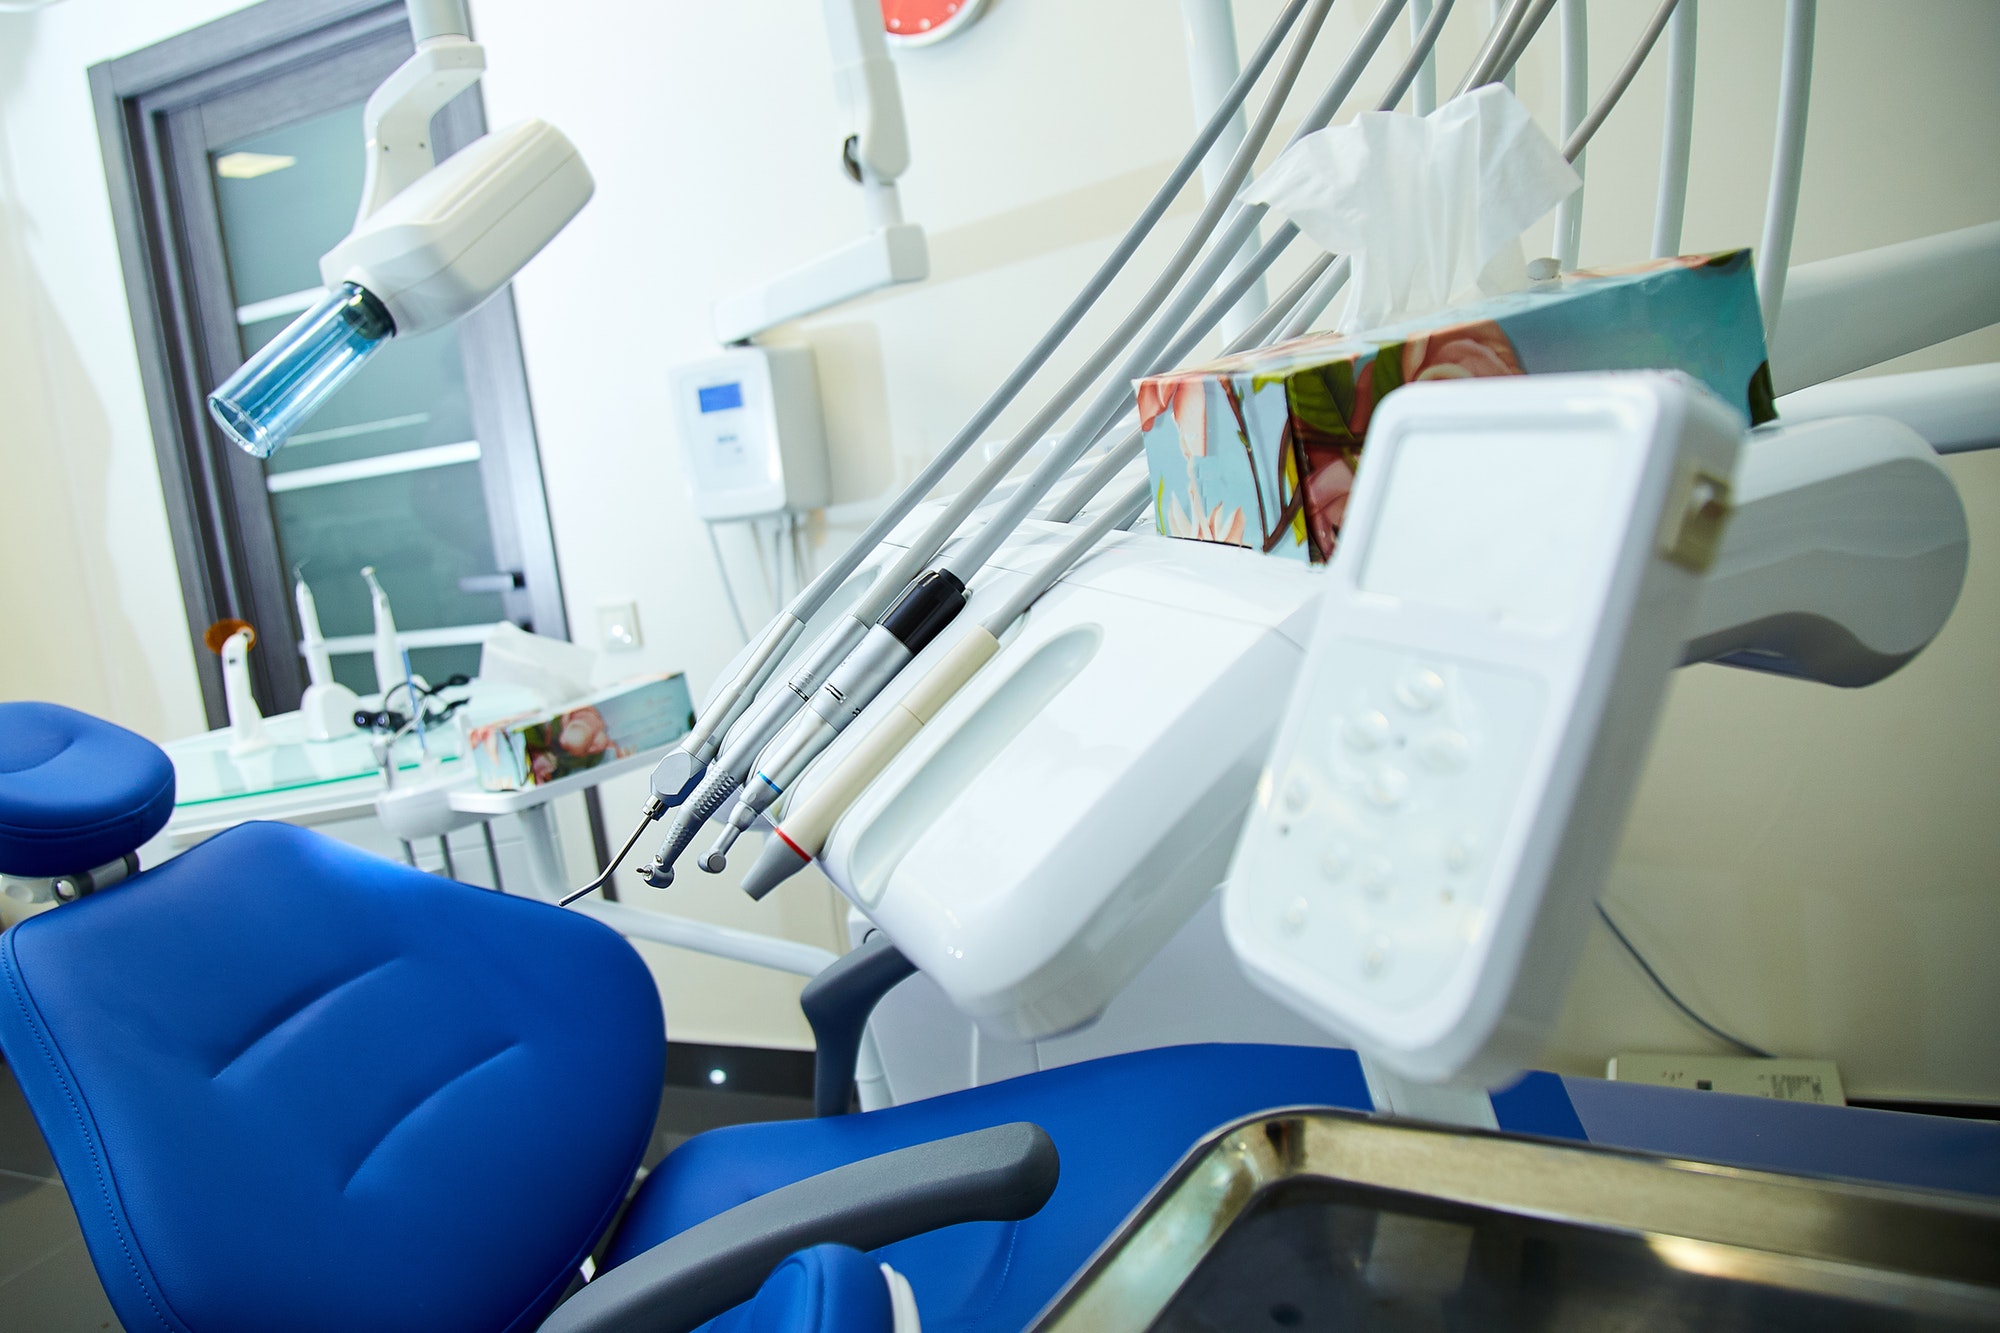 Modern metallic dentist tools and burnishers on a dentist chair